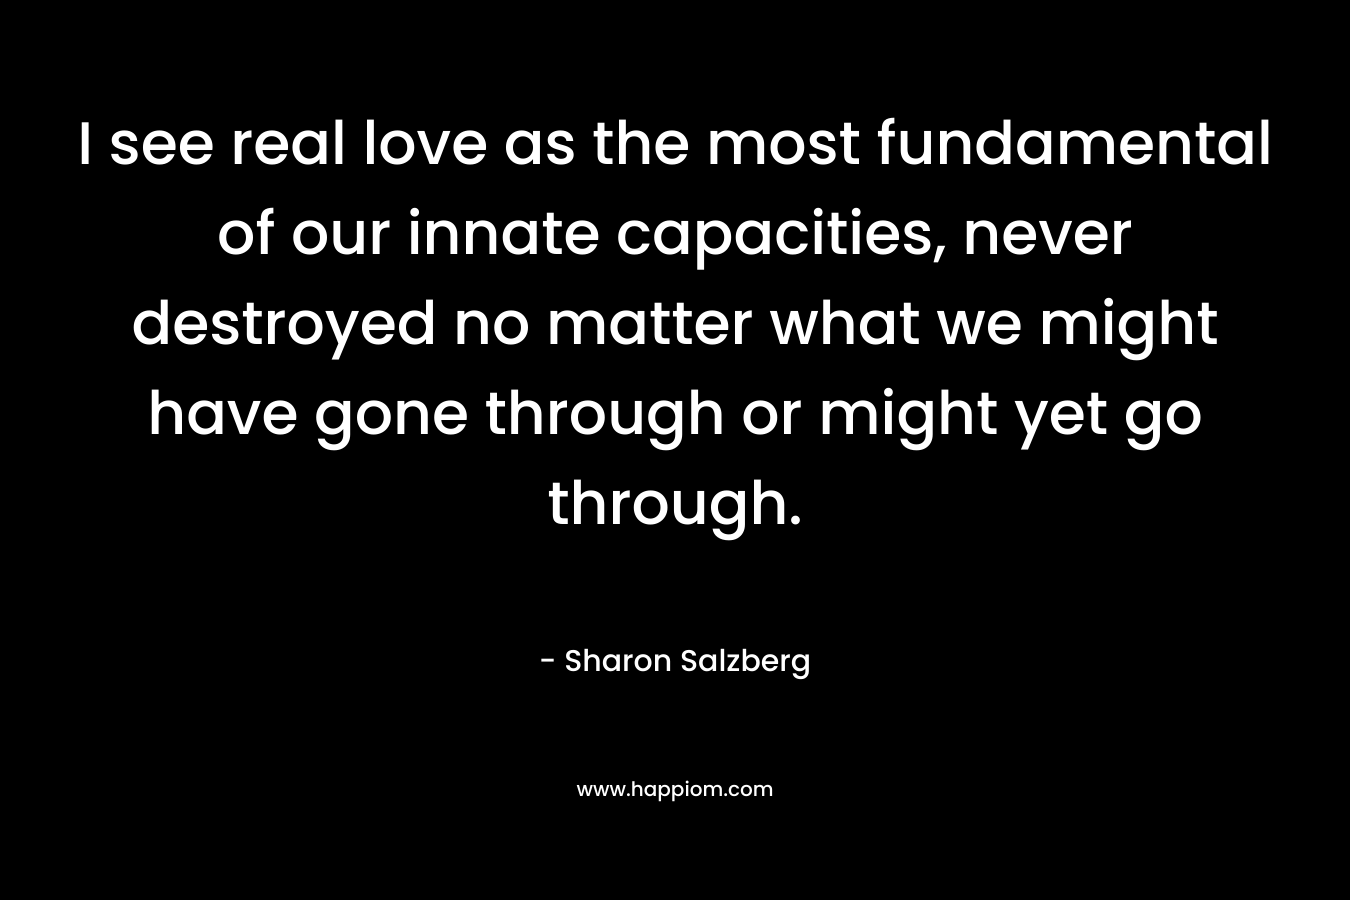 I see real love as the most fundamental of our innate capacities, never destroyed no matter what we might have gone through or might yet go through. – Sharon Salzberg